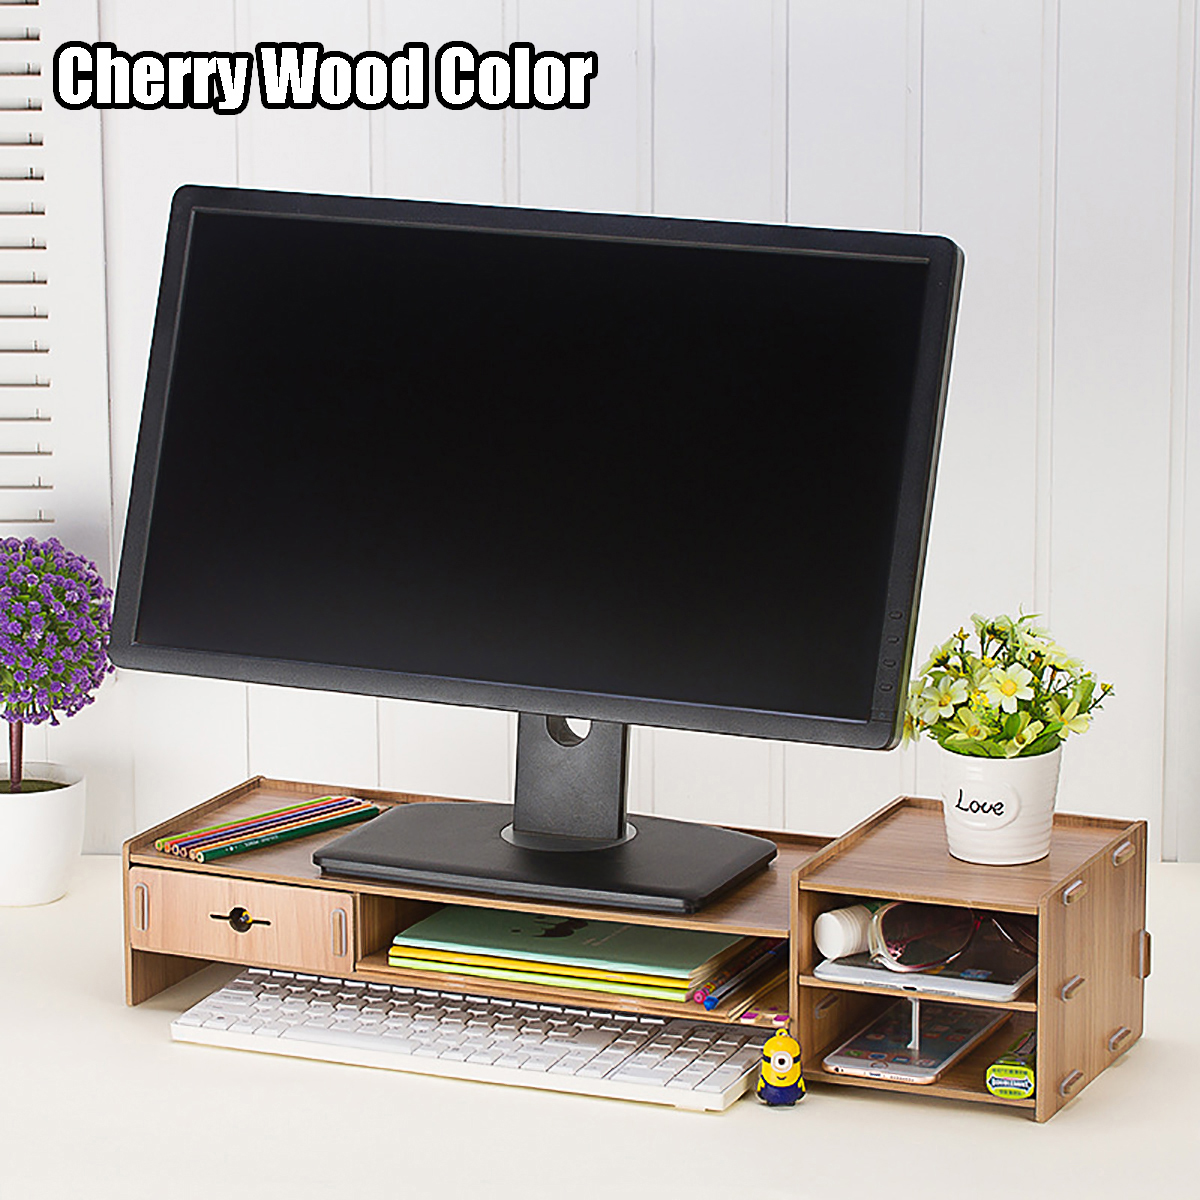 Wooden-Monitor-Stand-Desktop-Computer-Riser-LED-LCD-Monitor-Laptop-Notebook-Support-Stationery-Holde-1757935-3